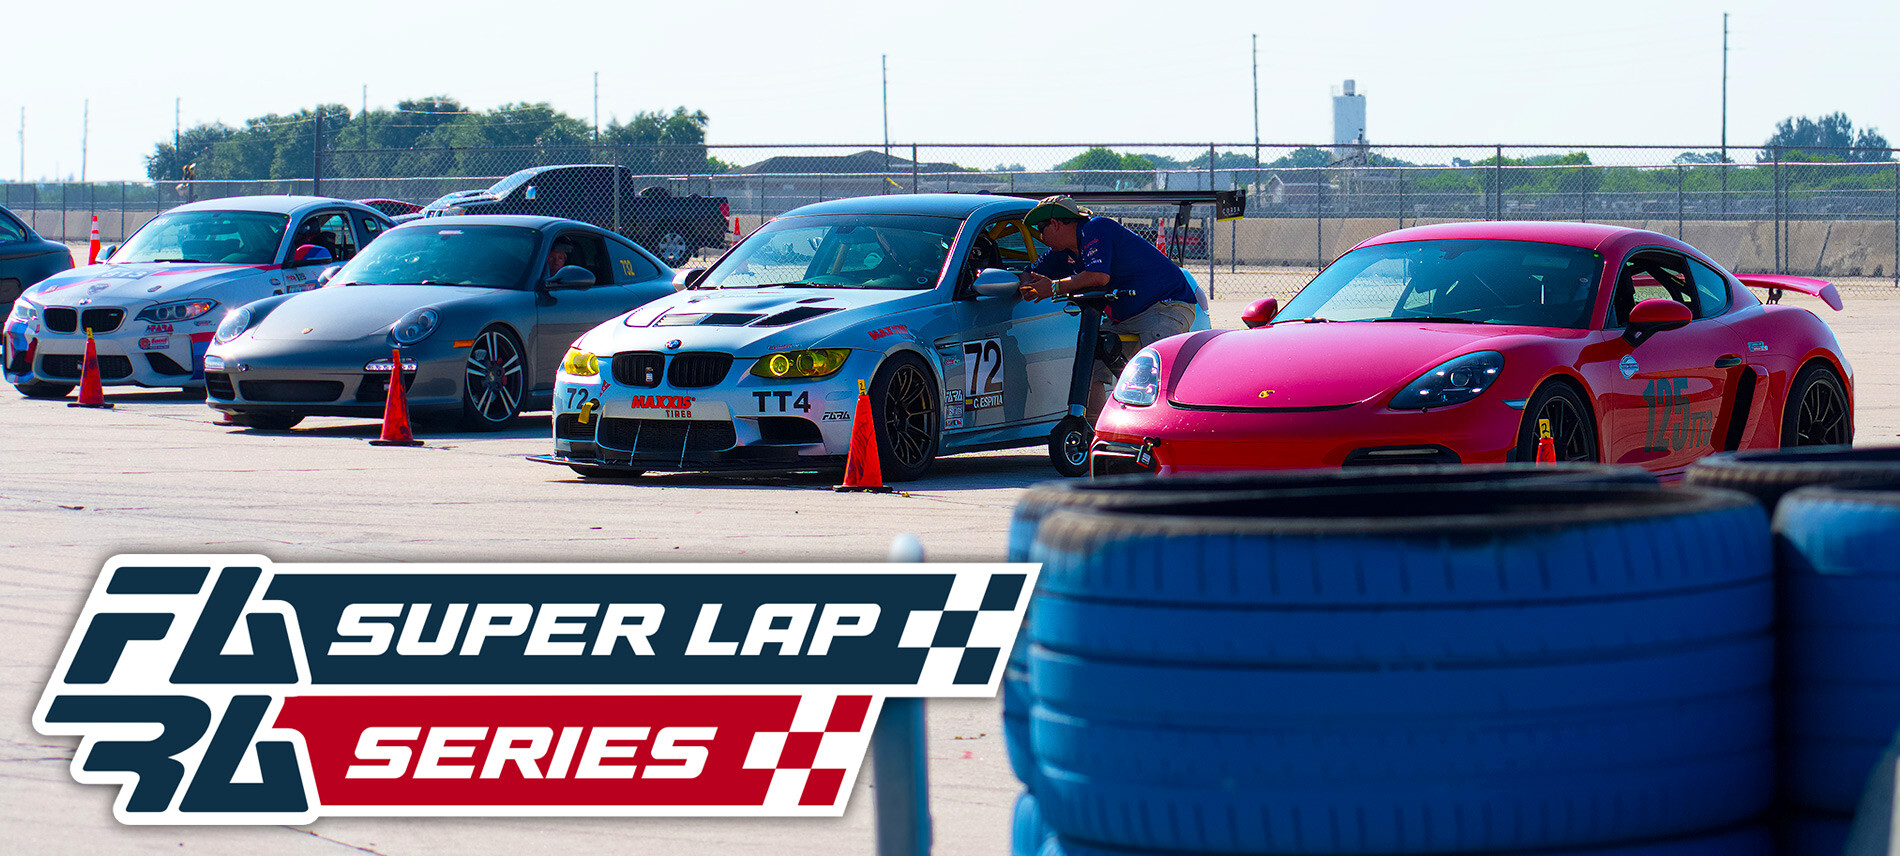 FARA Super Lap Series - Time Attack / Time Trials Competition in Florida